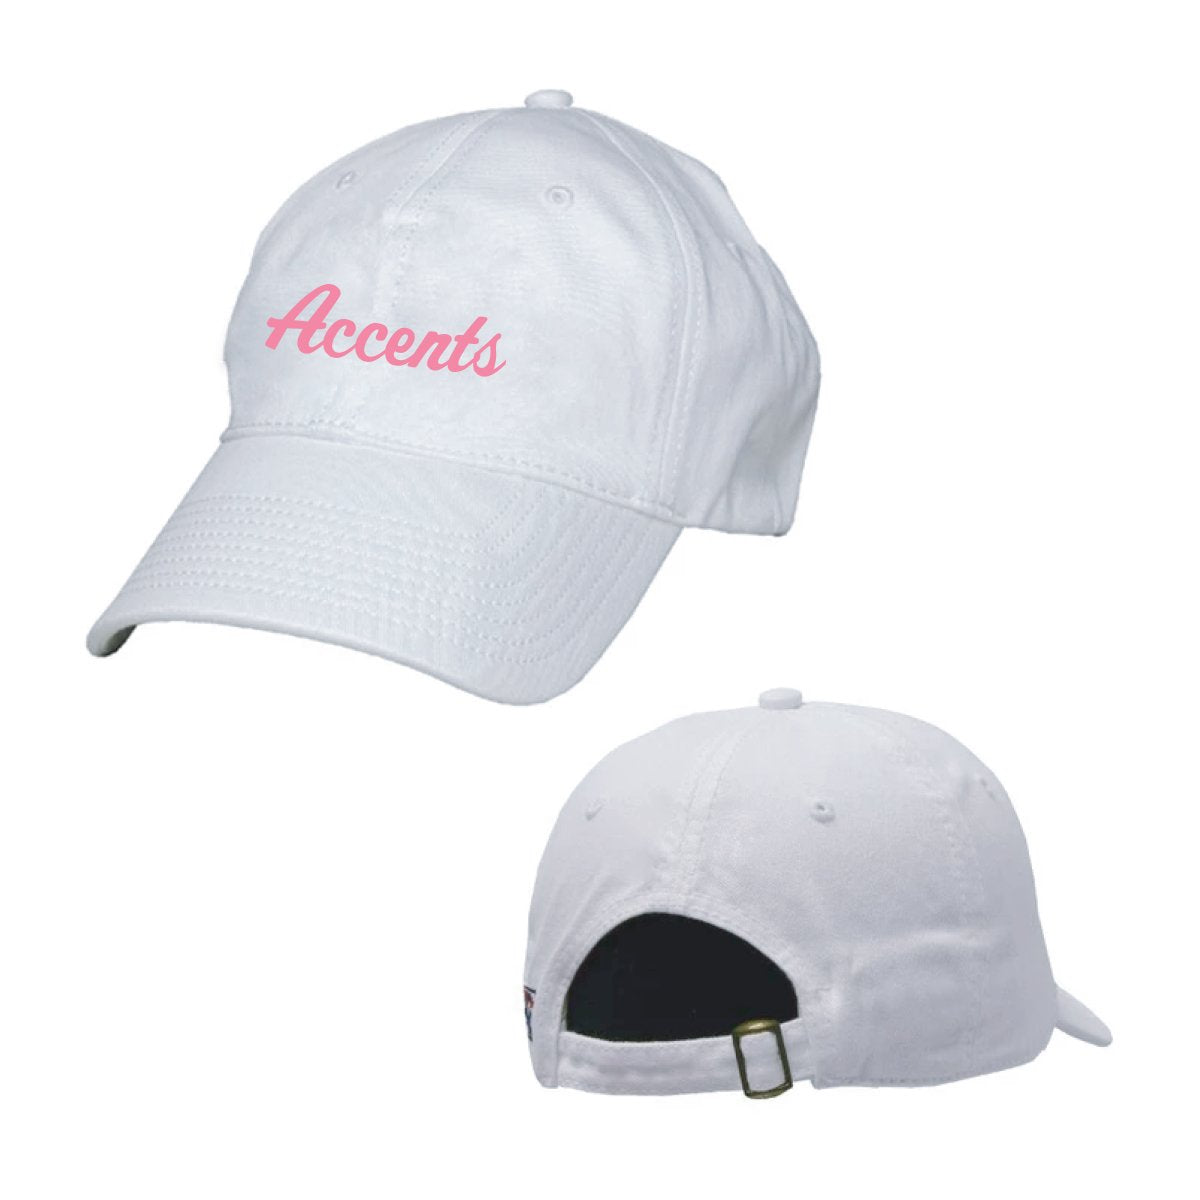 Accents White Ball Cap